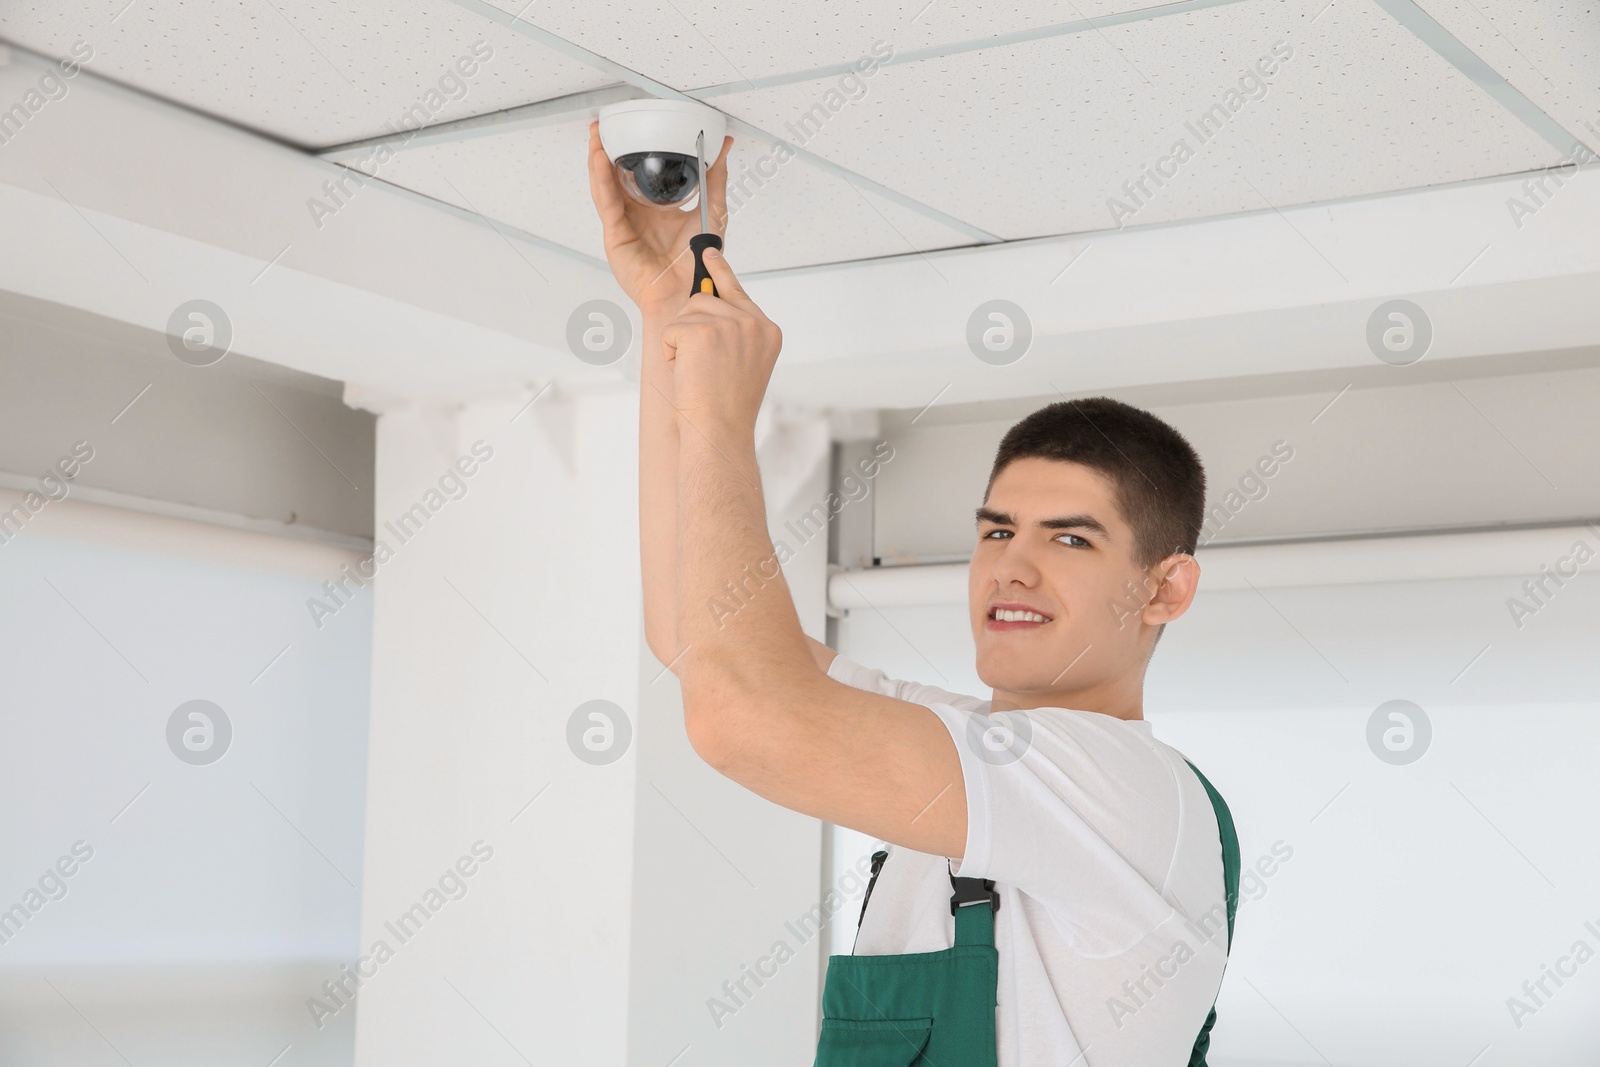 Photo of Technician with screwdriver installing CCTV camera on ceiling indoors